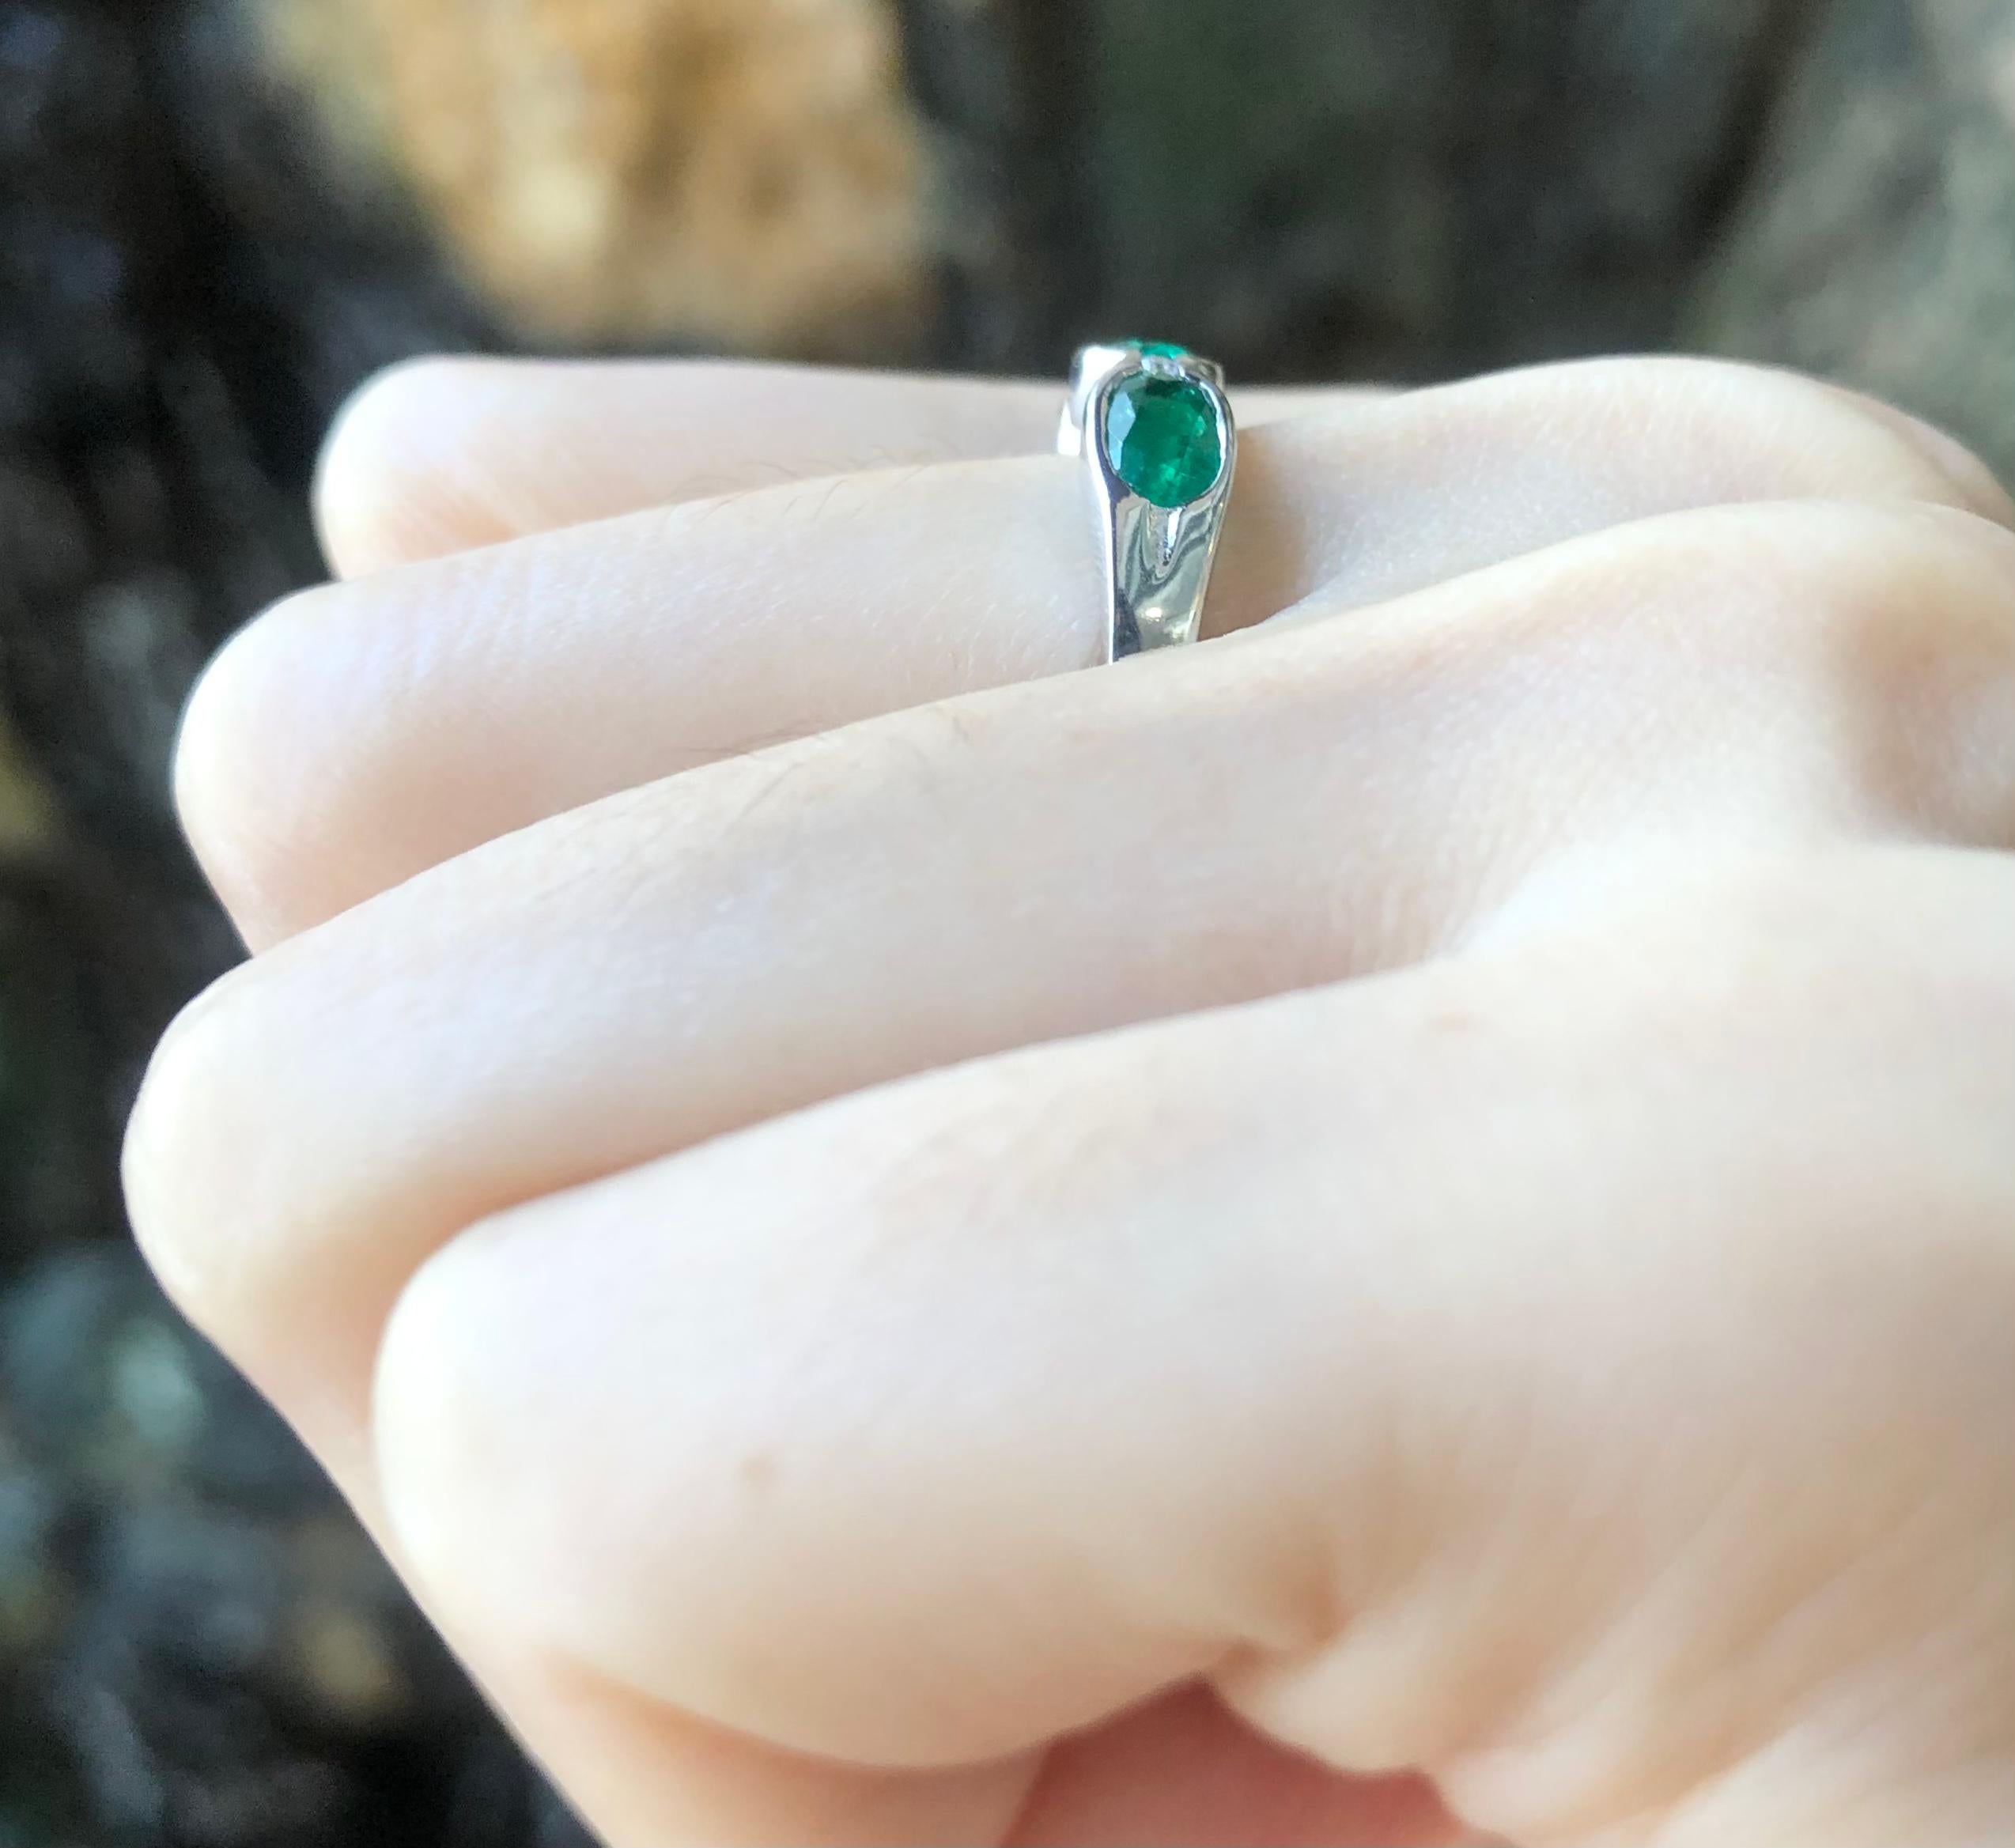 Emerald 1.35 carats with Diamond 0.03 carat Ring set in 18 Karat White Gold Settings

Width:  1.8 cm 
Length: 0.5 cm
Ring Size: 55
Total Weight: 3.41 grams

